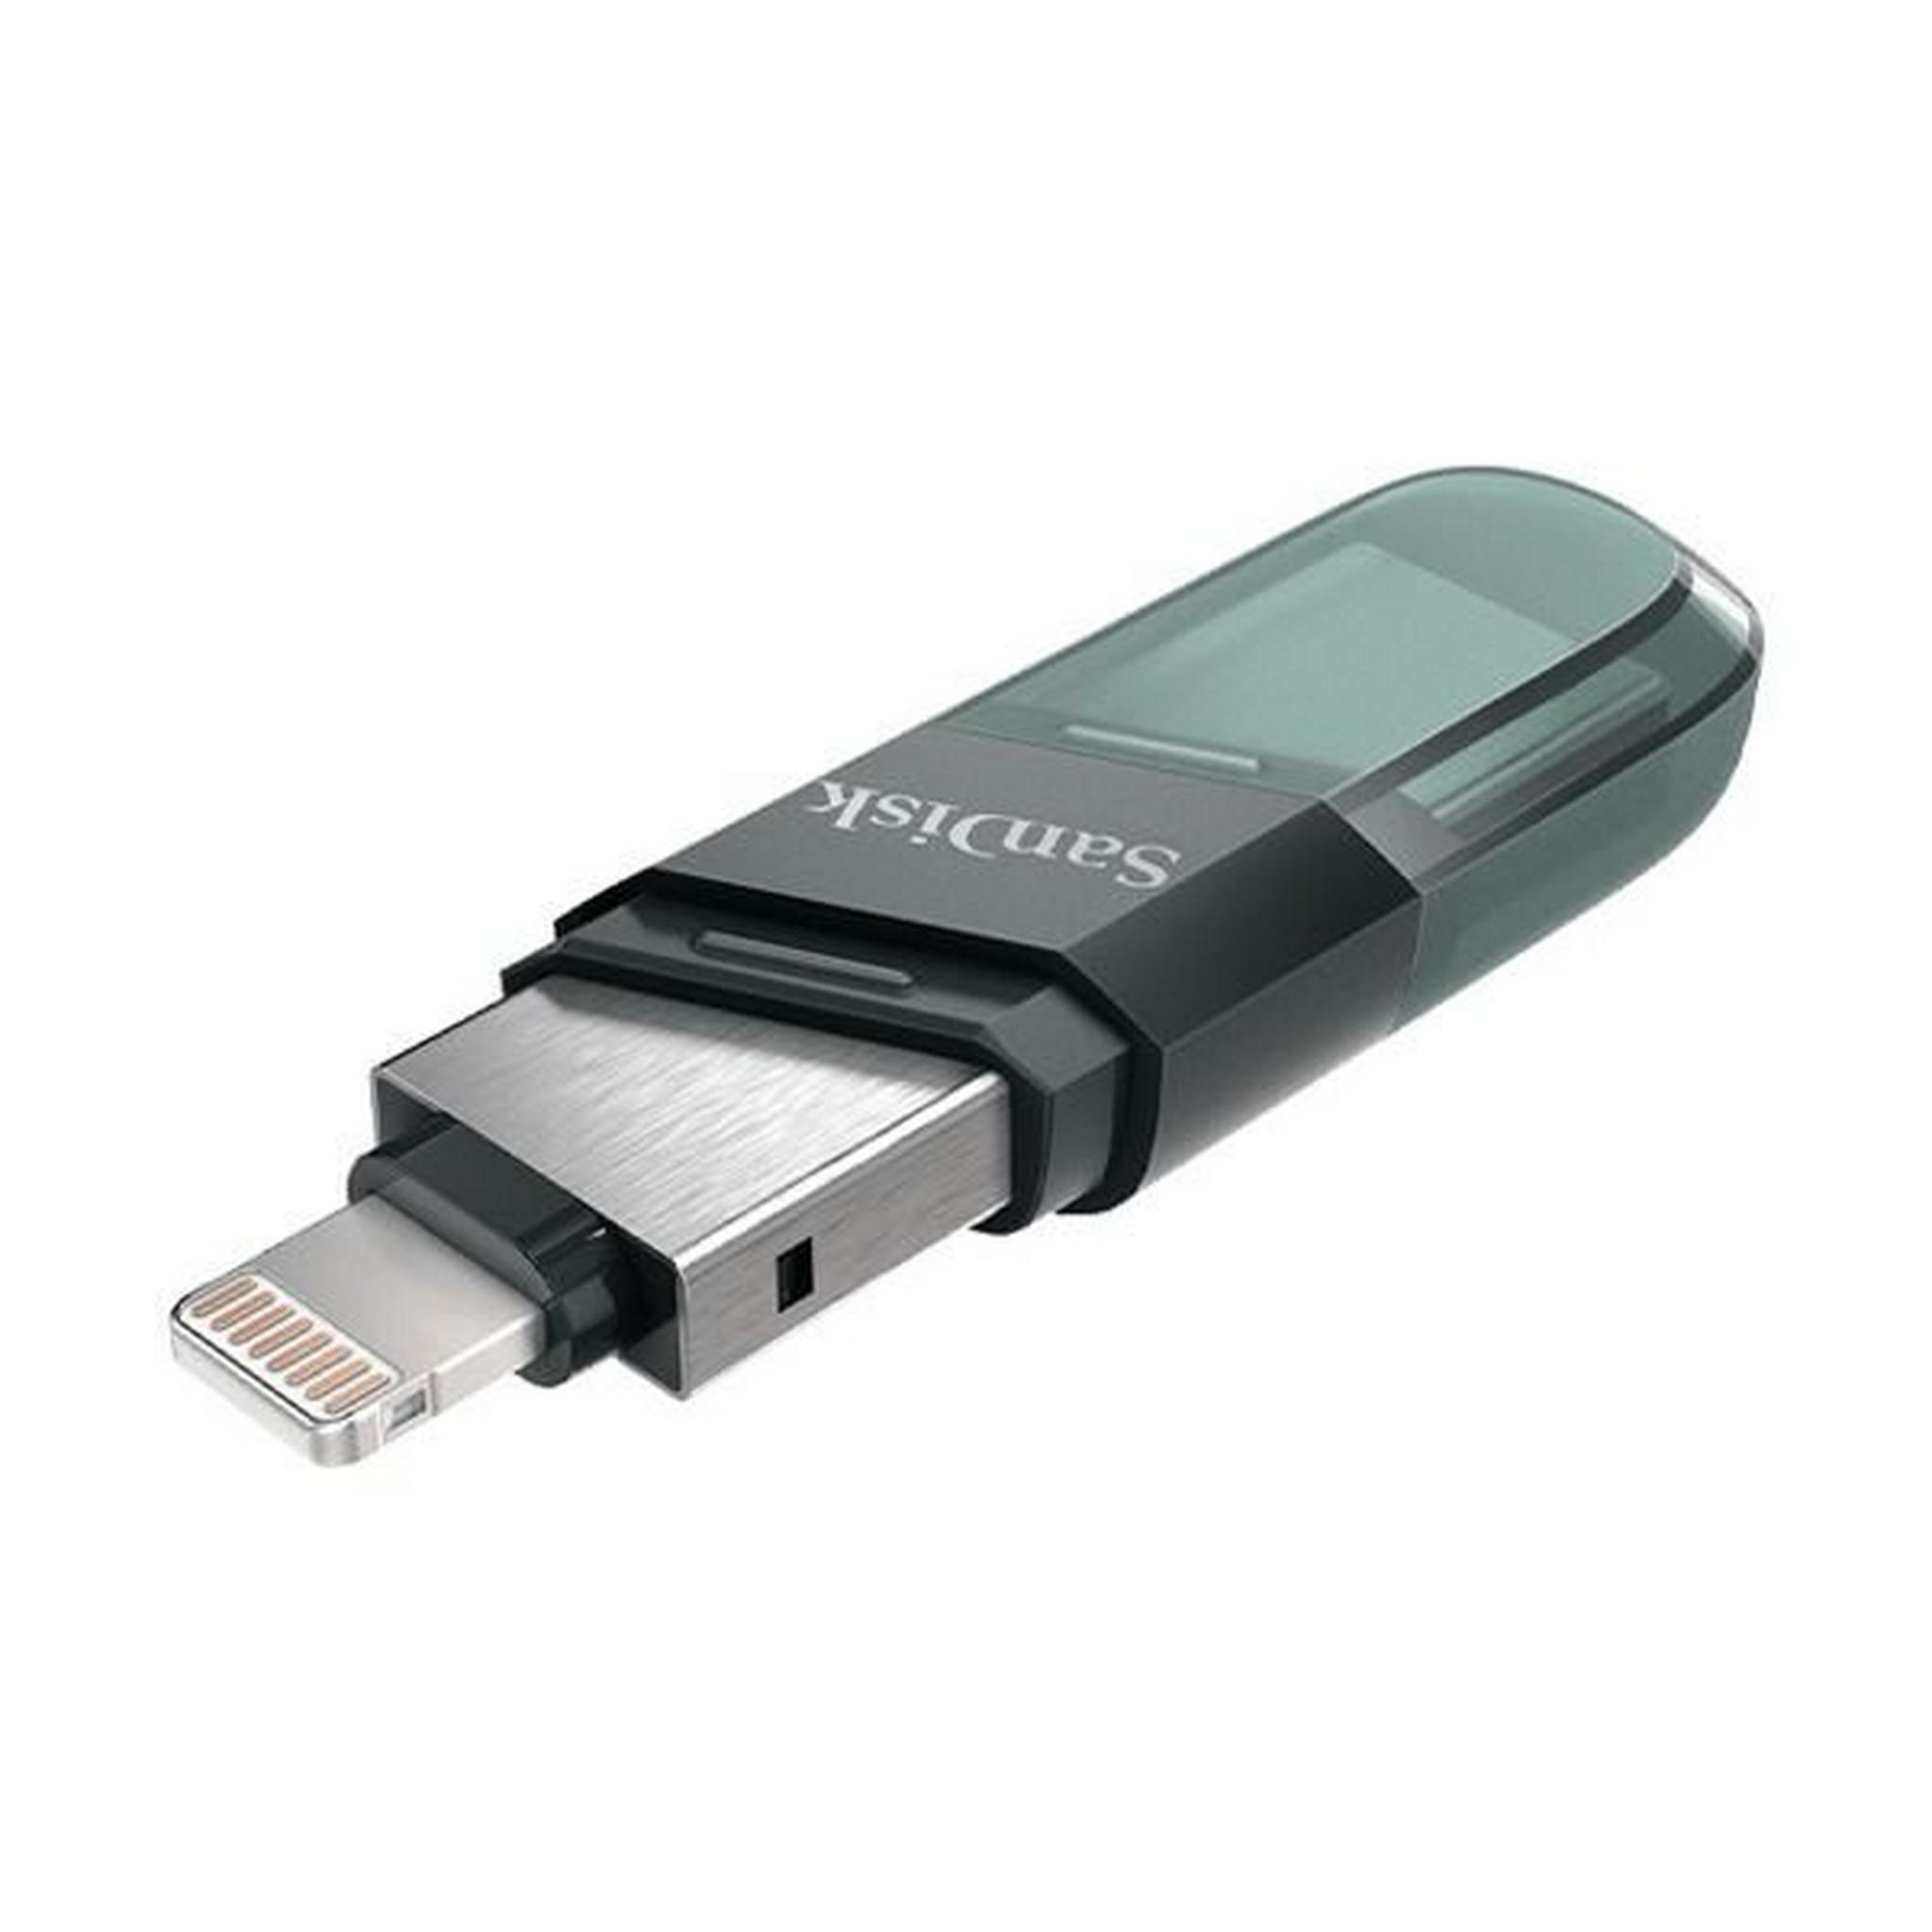 SanDisk 64GB iXpand Flip Flash Drive USB 3.1 and Lightening, for iOS, Windows and Mac